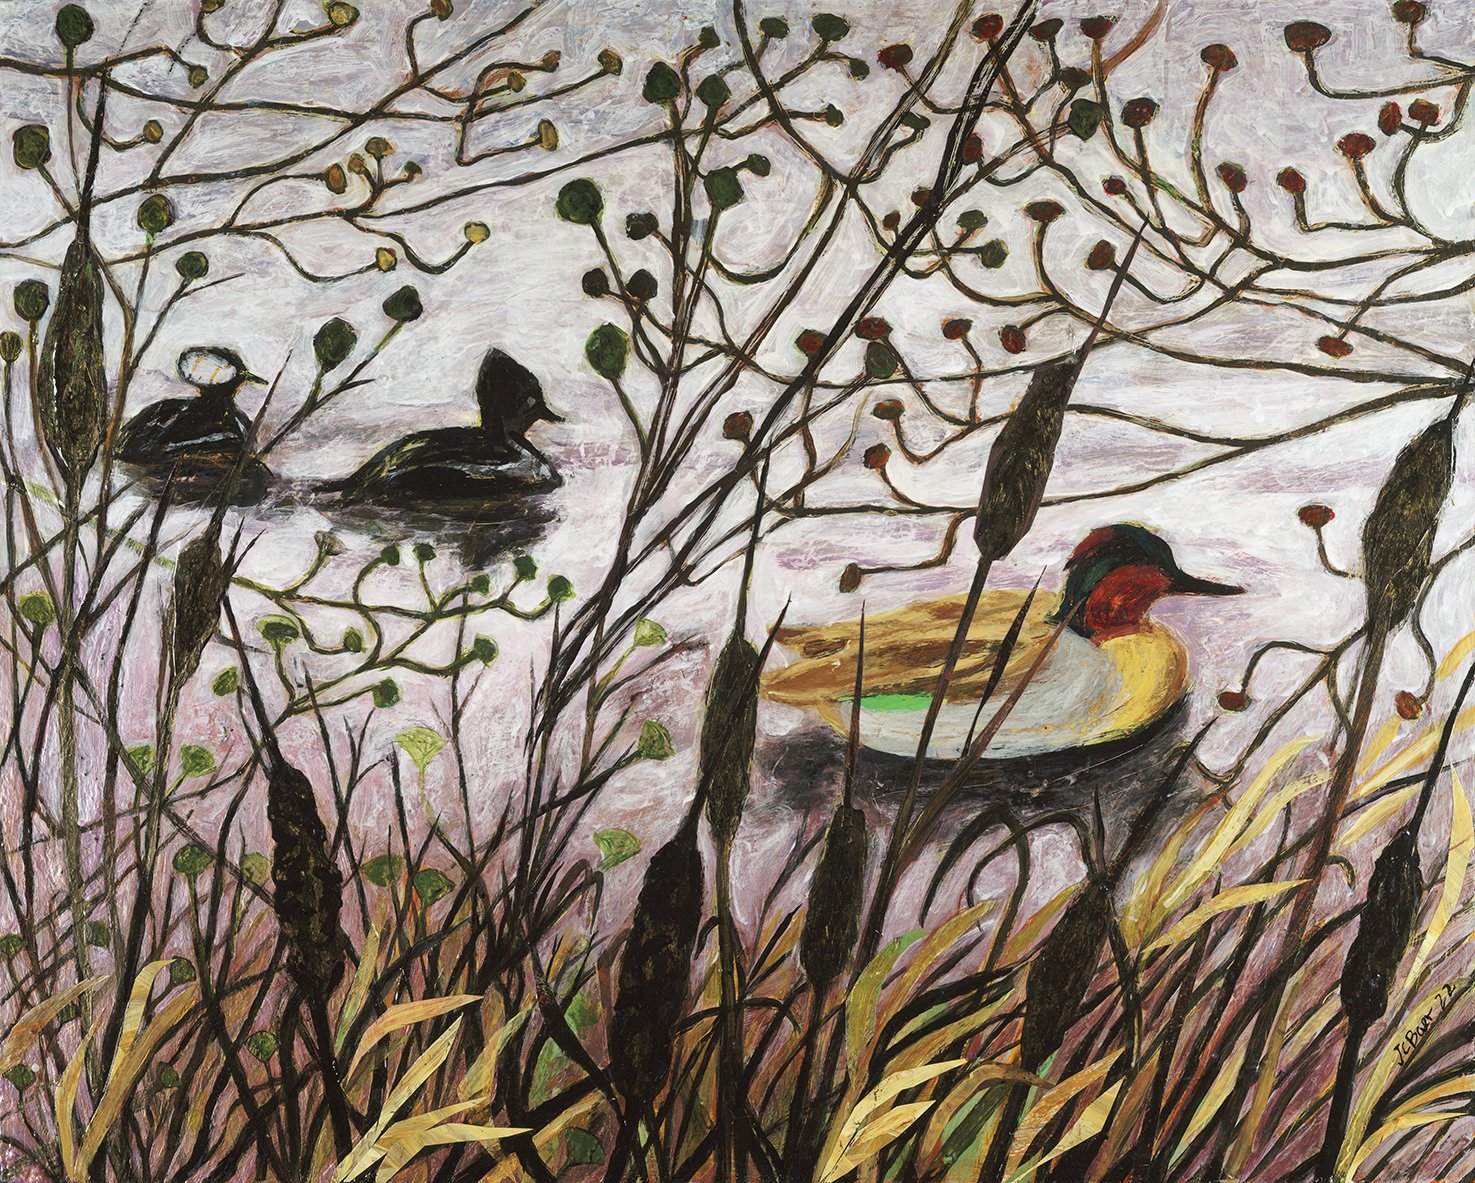 Green-Winged Teal, Hooded Mergansers, 2022, 24x30”, mixed media on wood panel, $2800